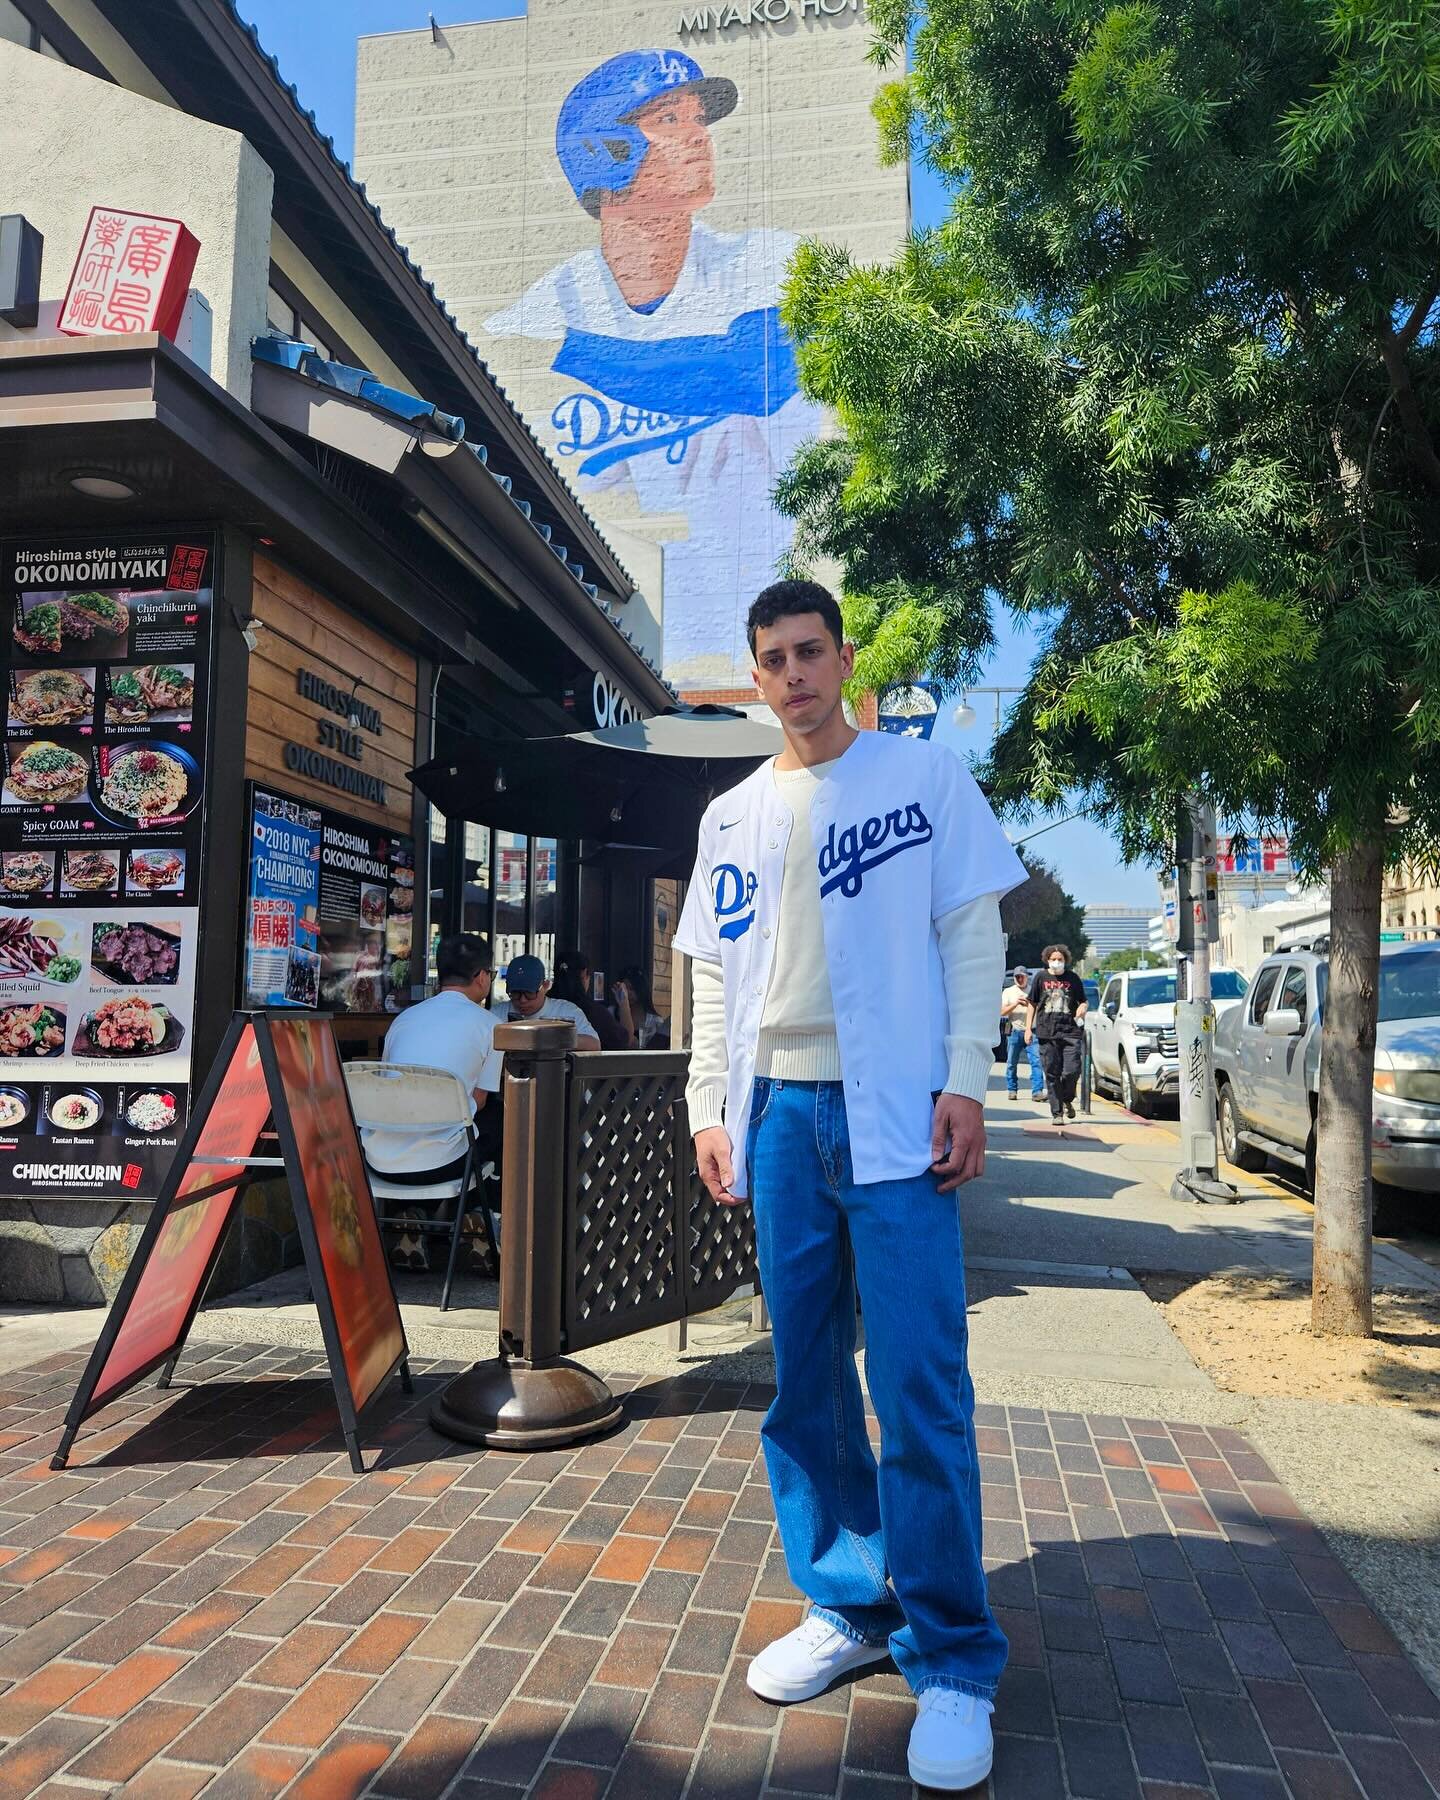 Supporting our boys in blue #Dodgers with our favorite blue jeans and #Ohtani this opening day!